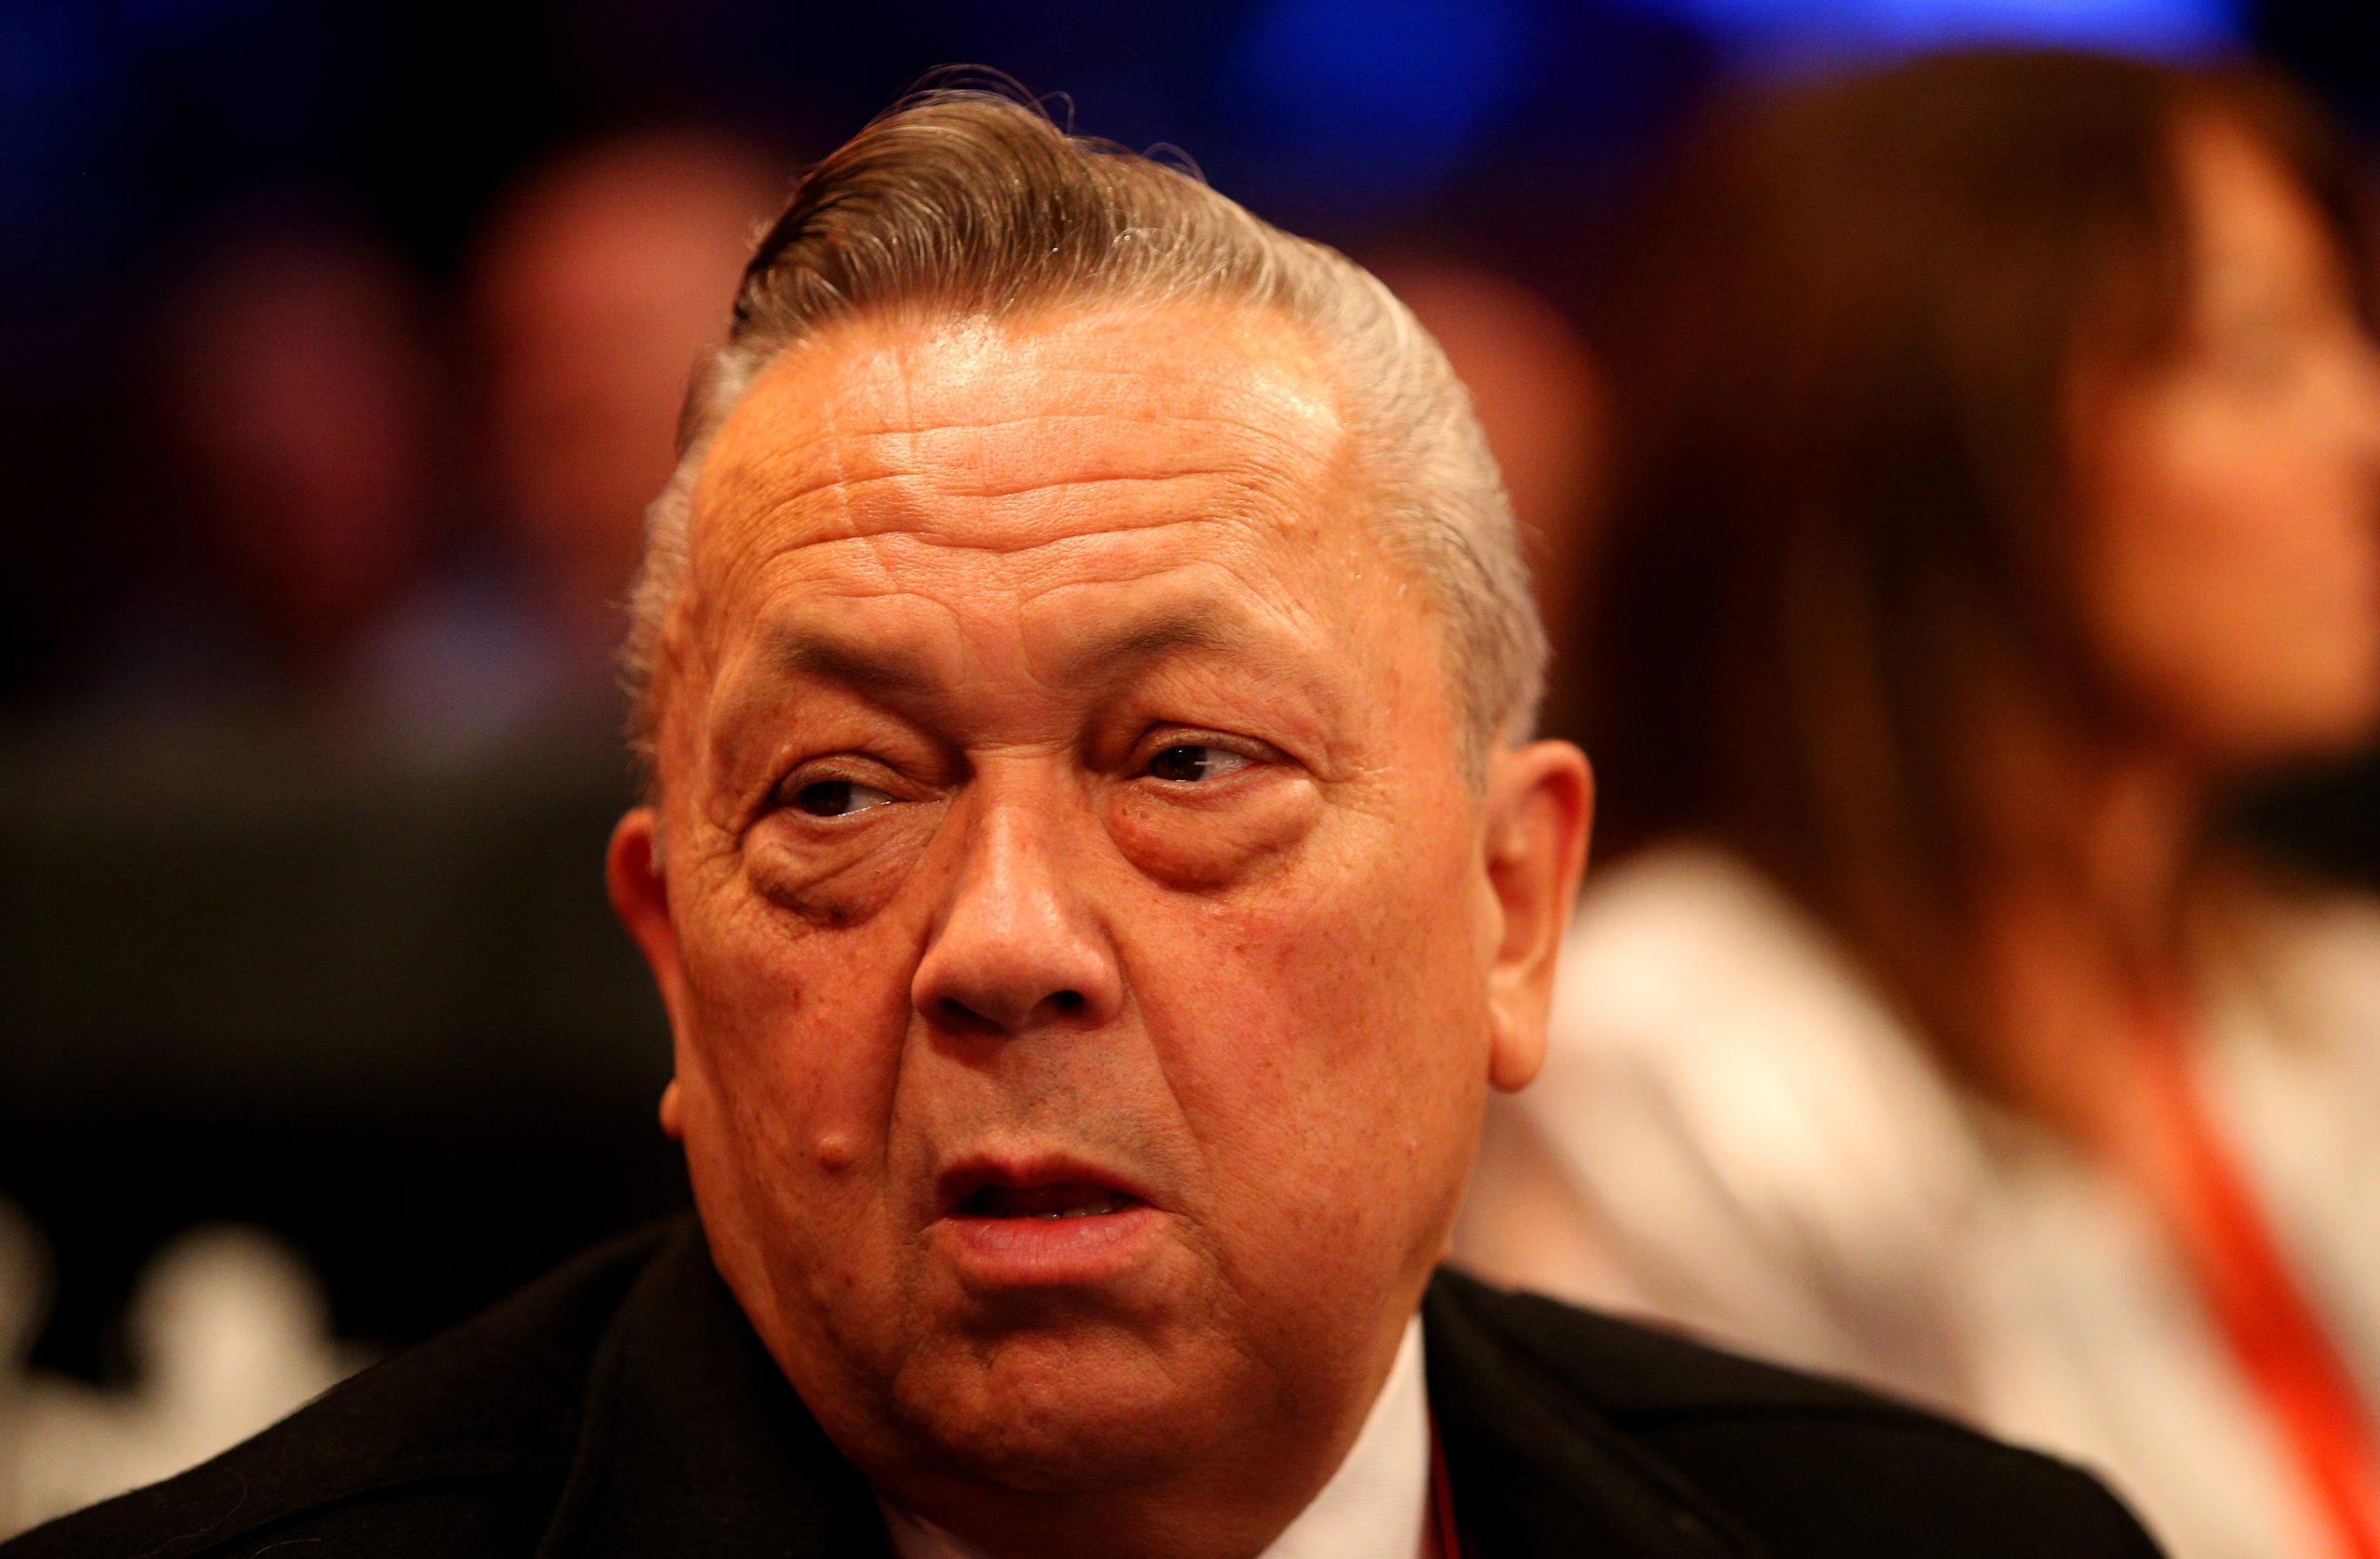 Furious West Ham co-owner David Sullivan hits out at report about Liverpool star Divock Origi